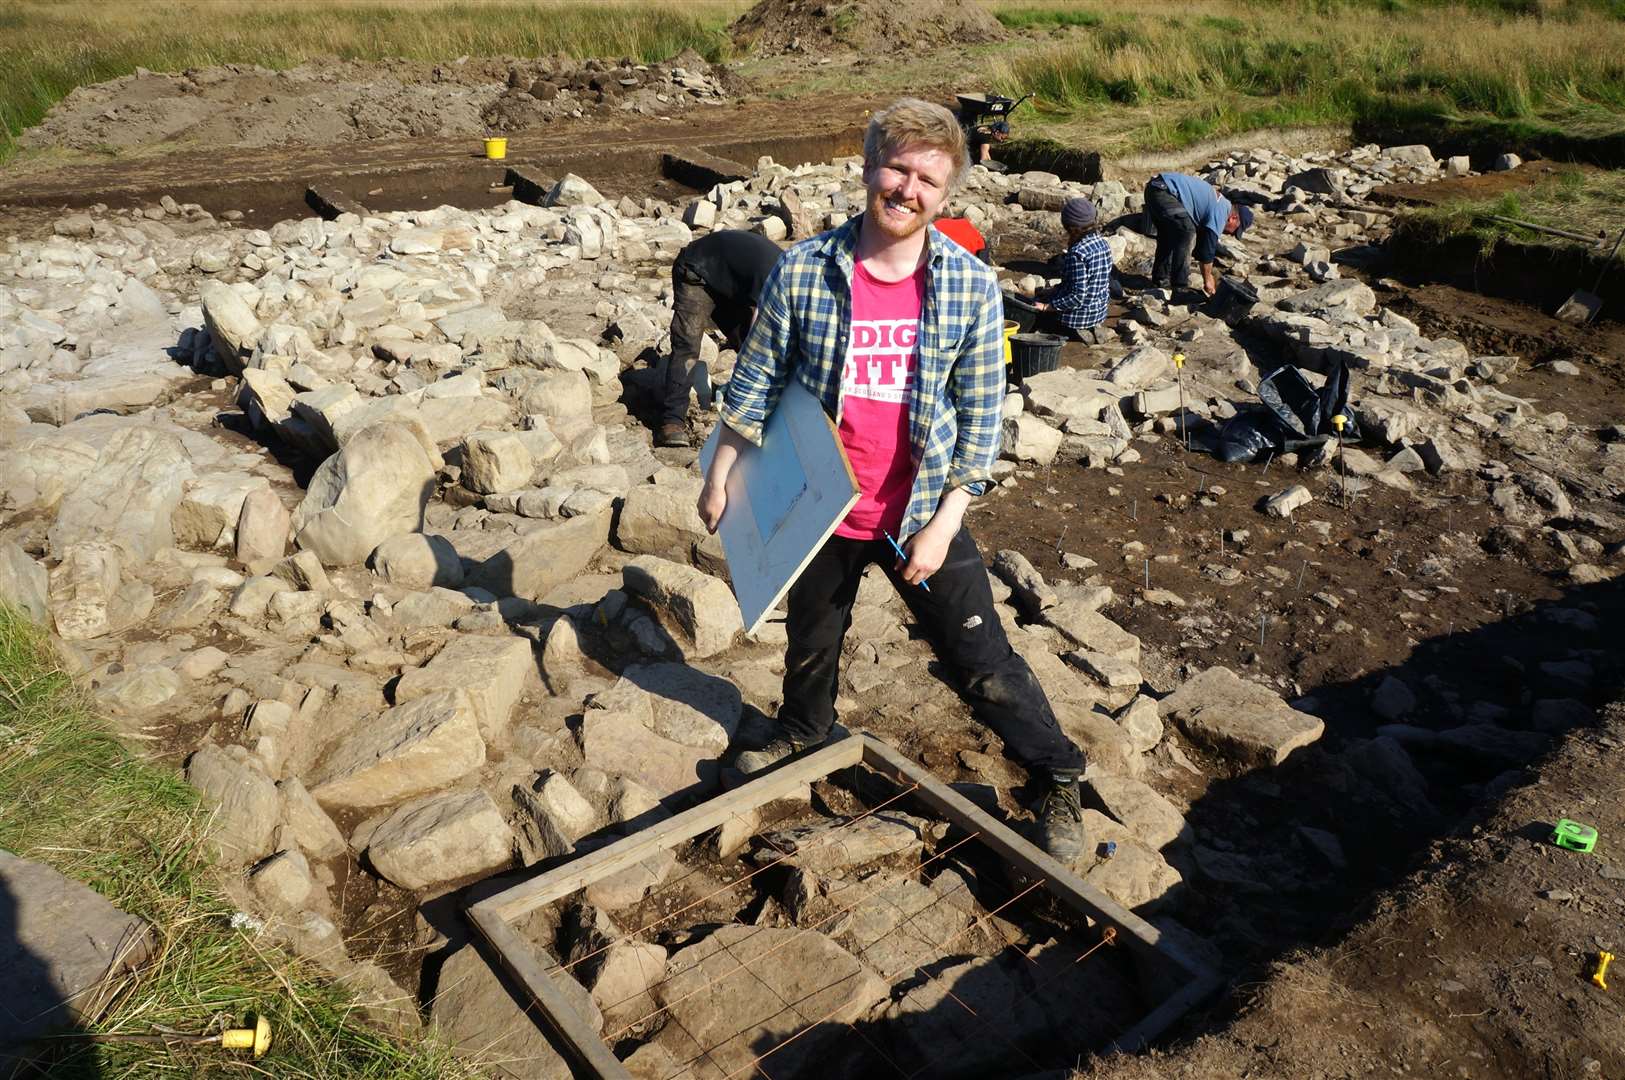 Kenneth McElroy from the Caithness Broch Project got involved in the dig as part of his archaeology degree.